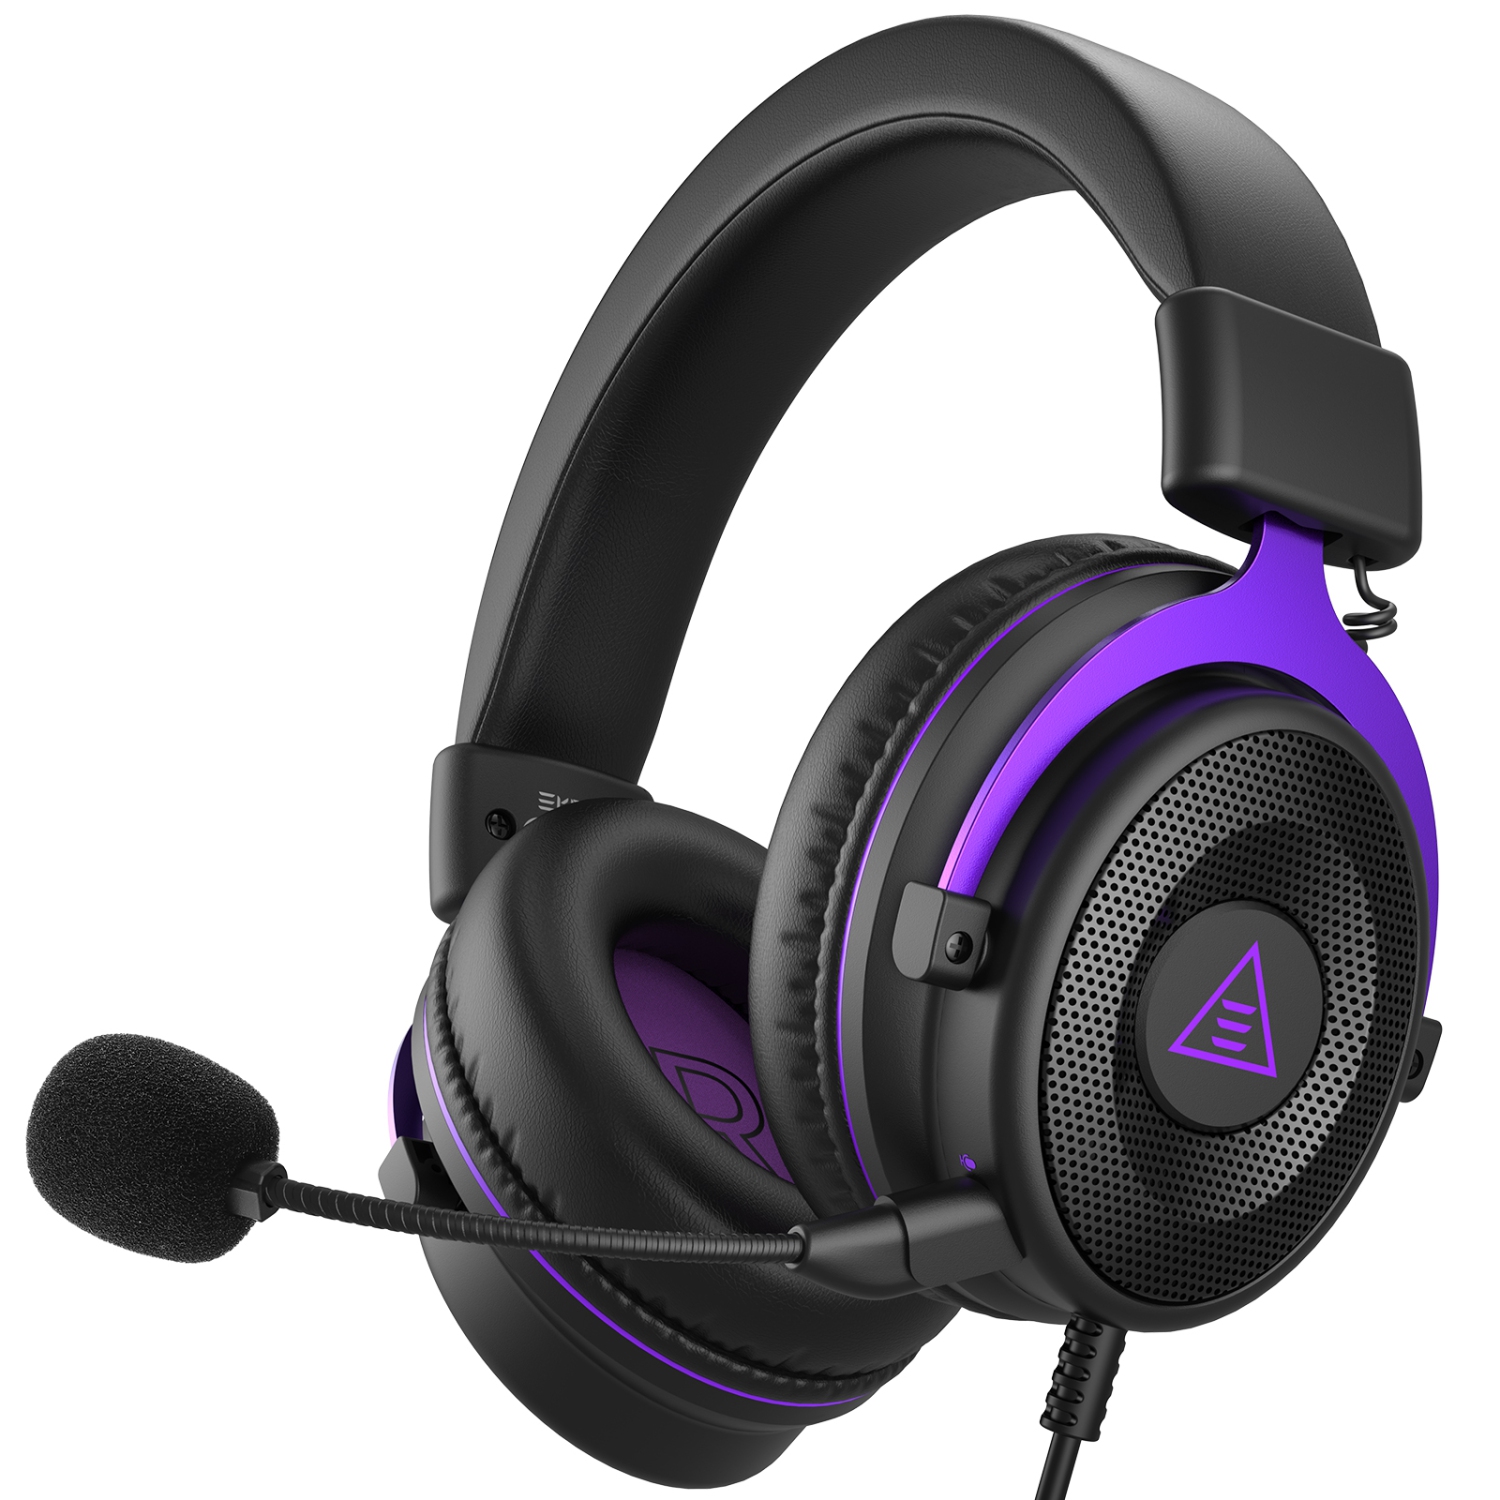 EKSA E900 Headset with Microphone for PC, PS4,PS5, Xbox - Detachable Noise Canceling Mic, 3D Surround Sound, Wired Headphone for Gaming, Computer, Laptop, Switch - Purple